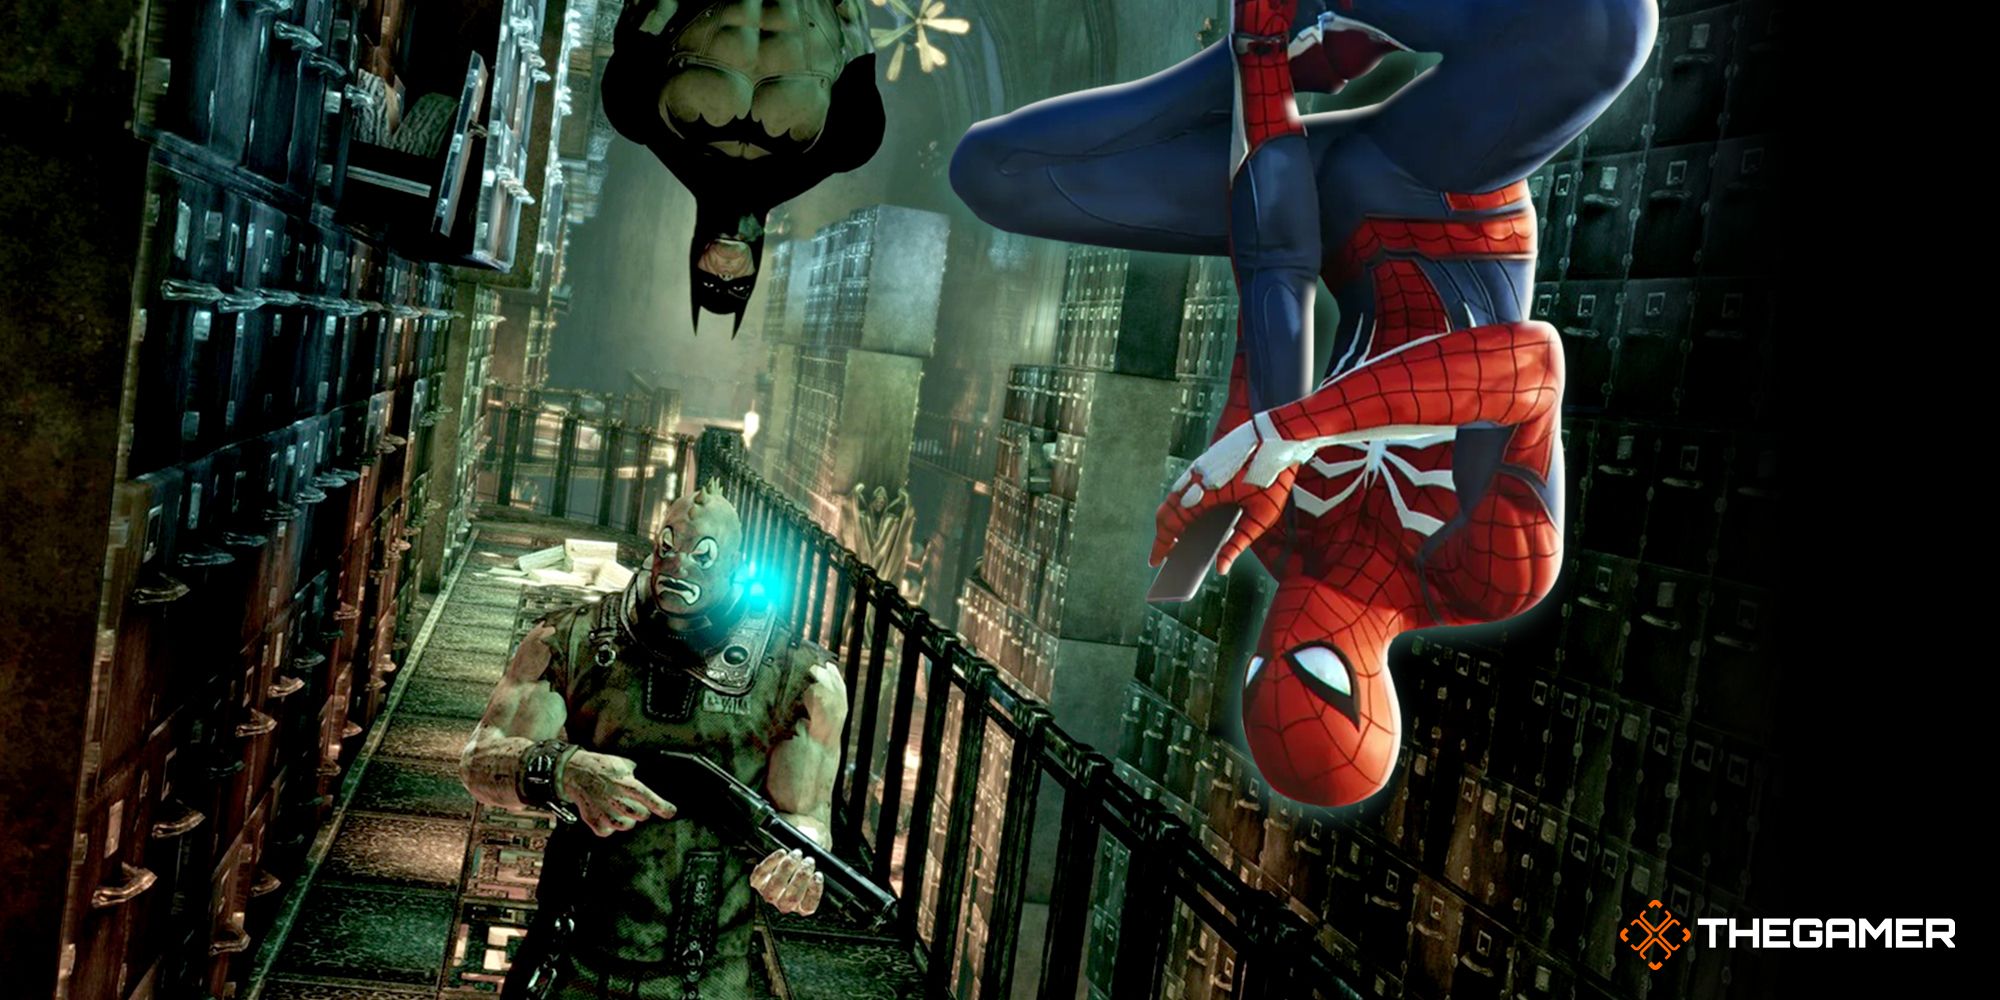 Batman and Spider-Man hanging upside down above a guard pacing through a location from Arkham Asylum